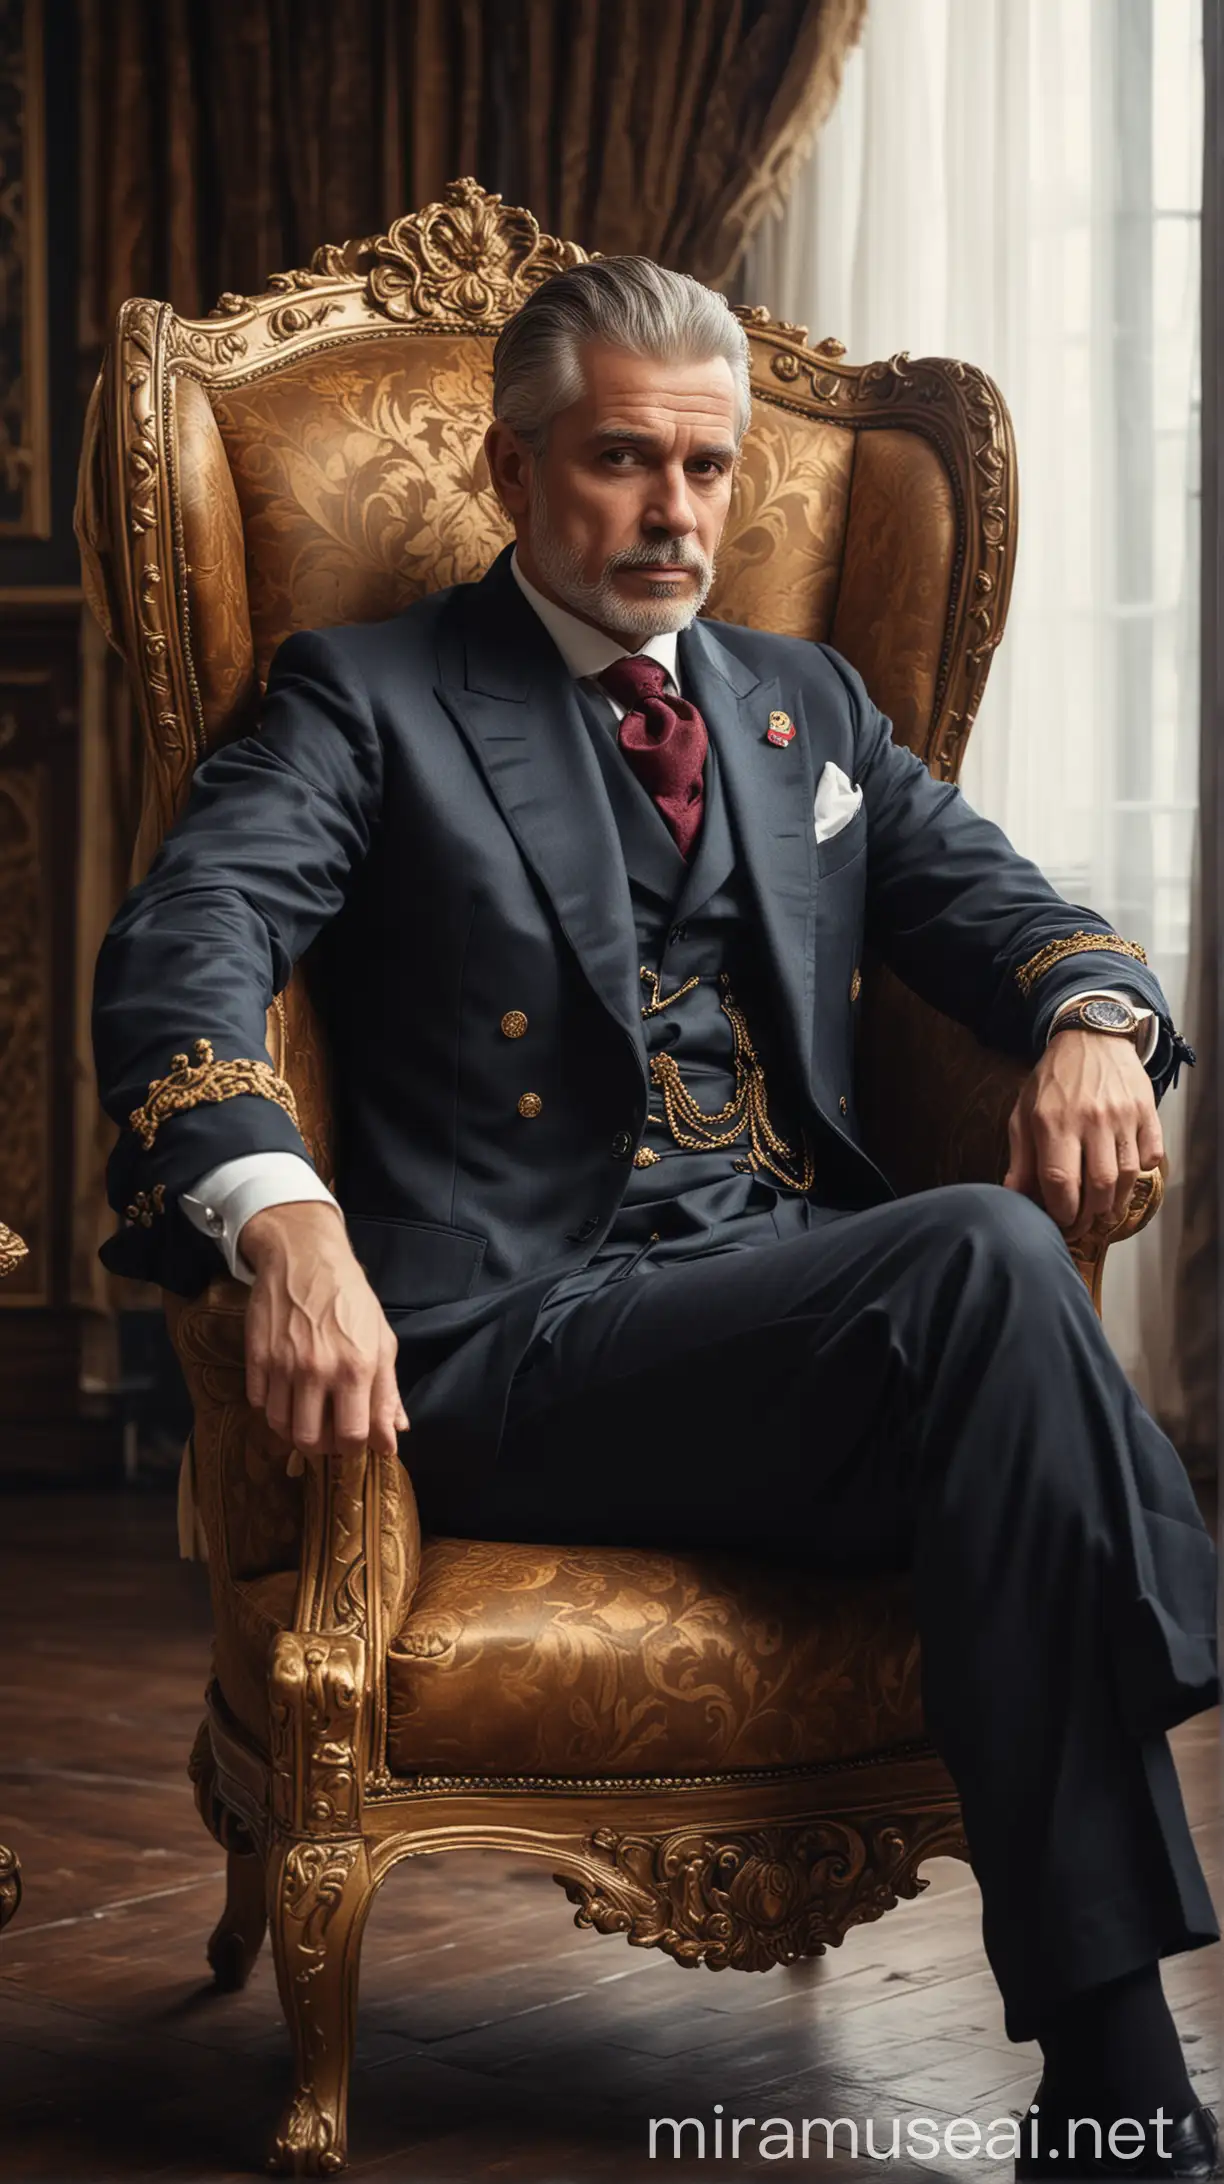 Distinguished Man Sitting on Royal Chair in Thoughtful Pose